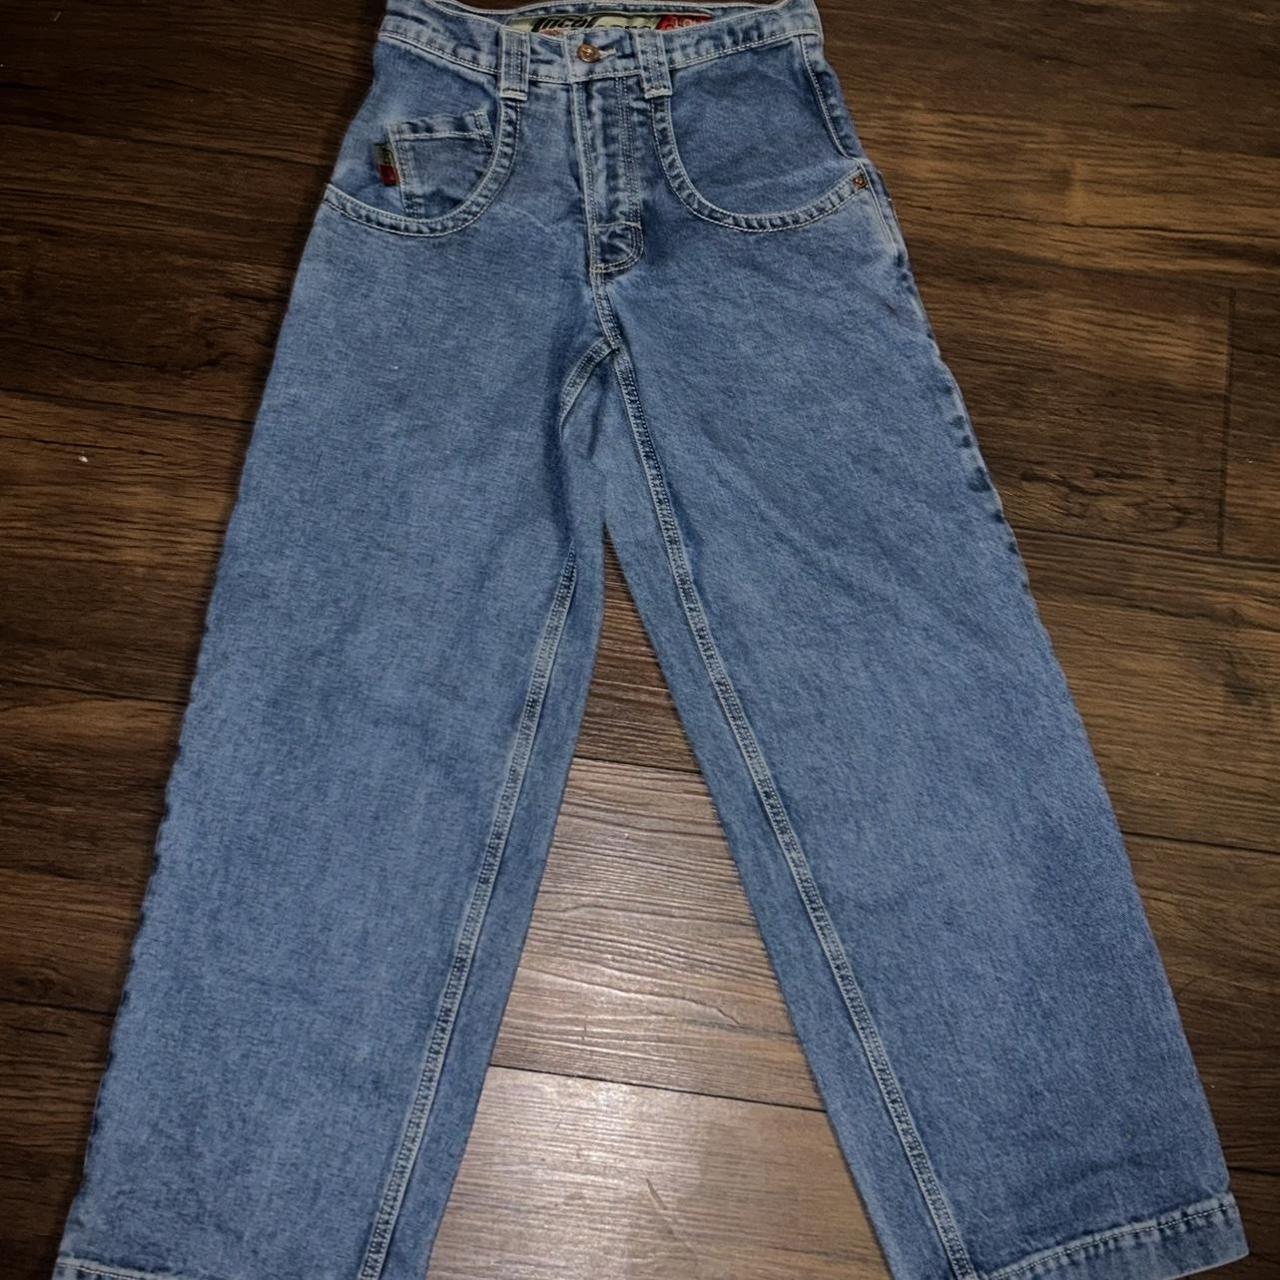 “The Low Down” Jnco jeans, Blue, Green Jnco... - Depop